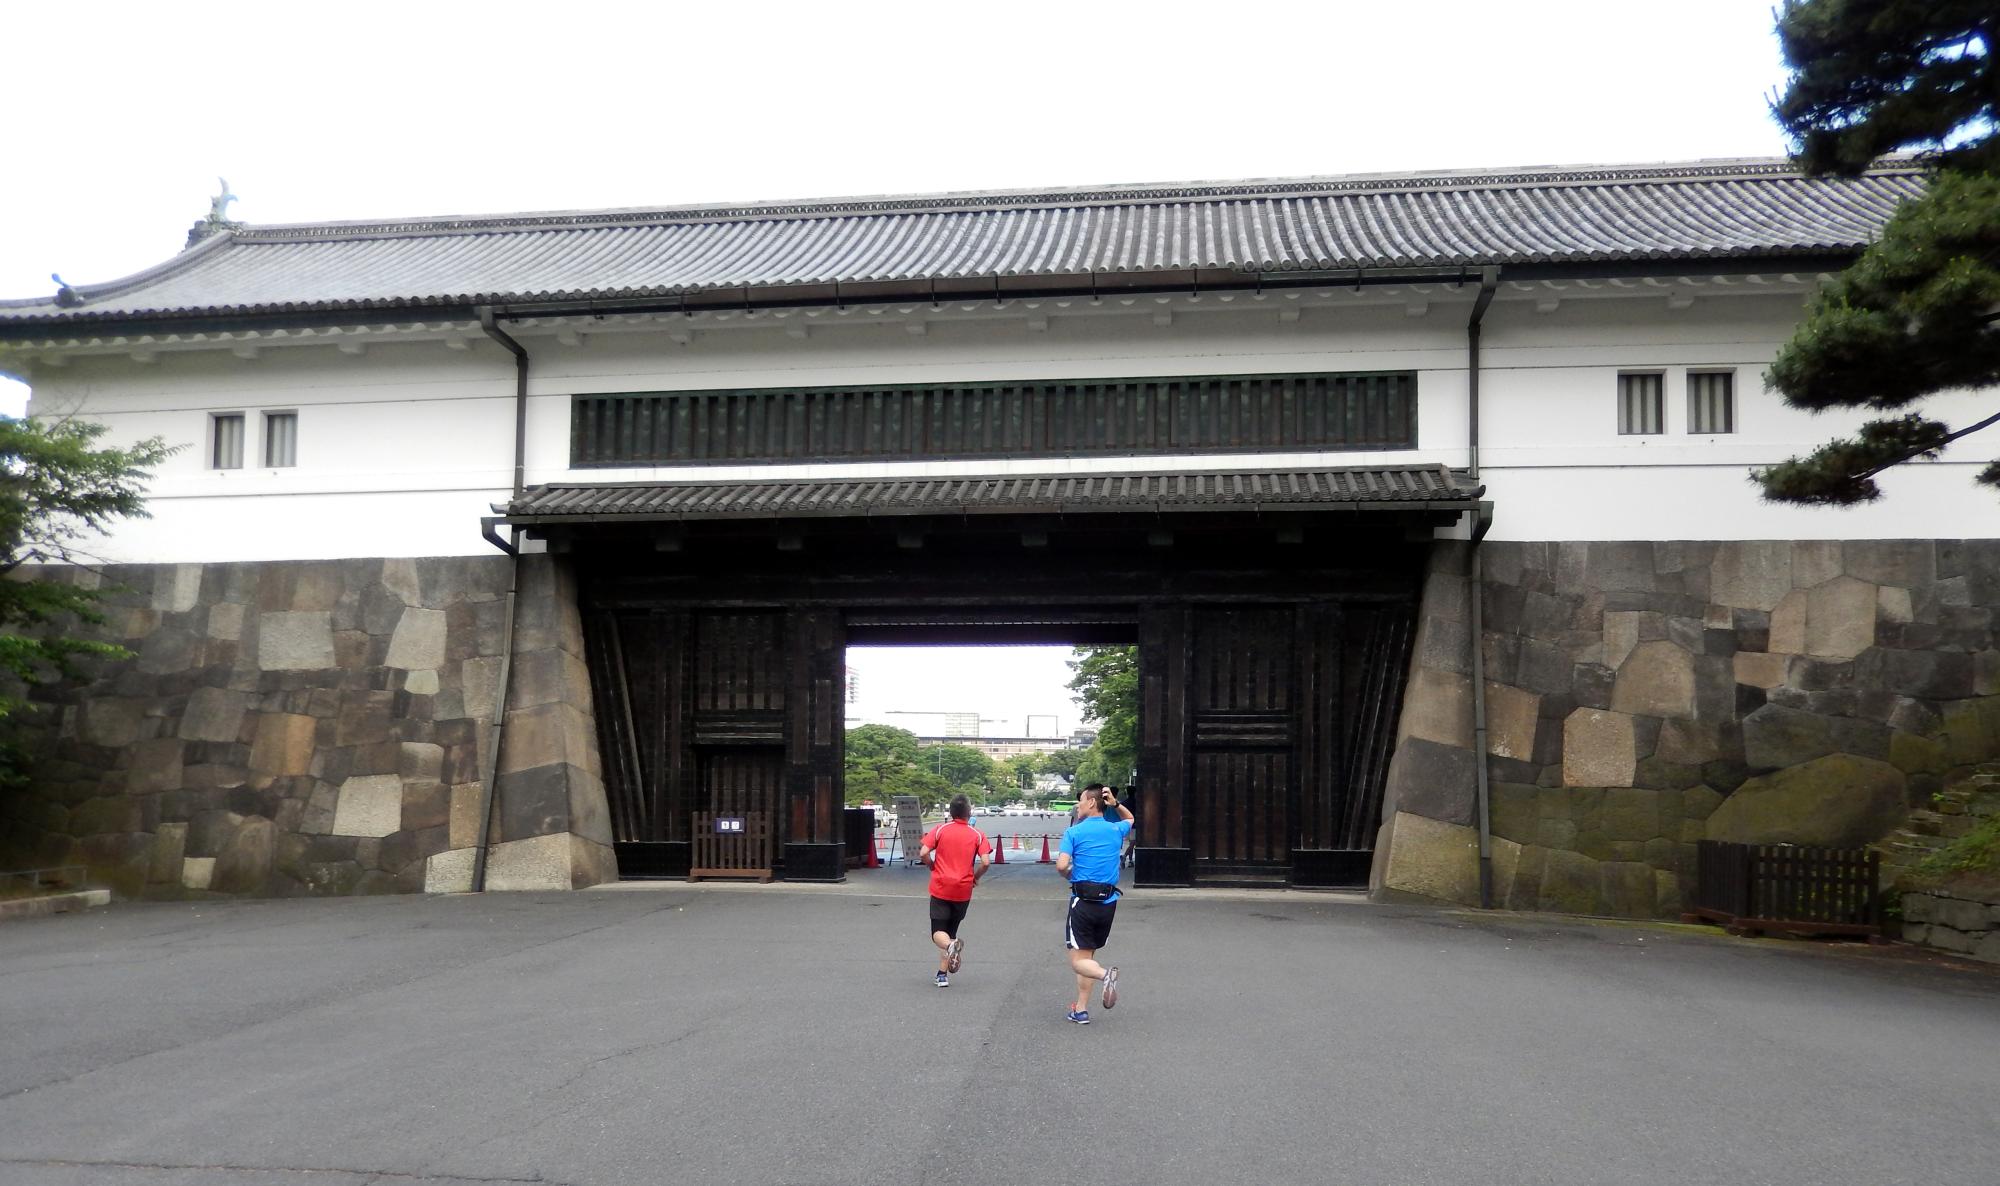 Tokyo (2017) - Imperial Palace #16